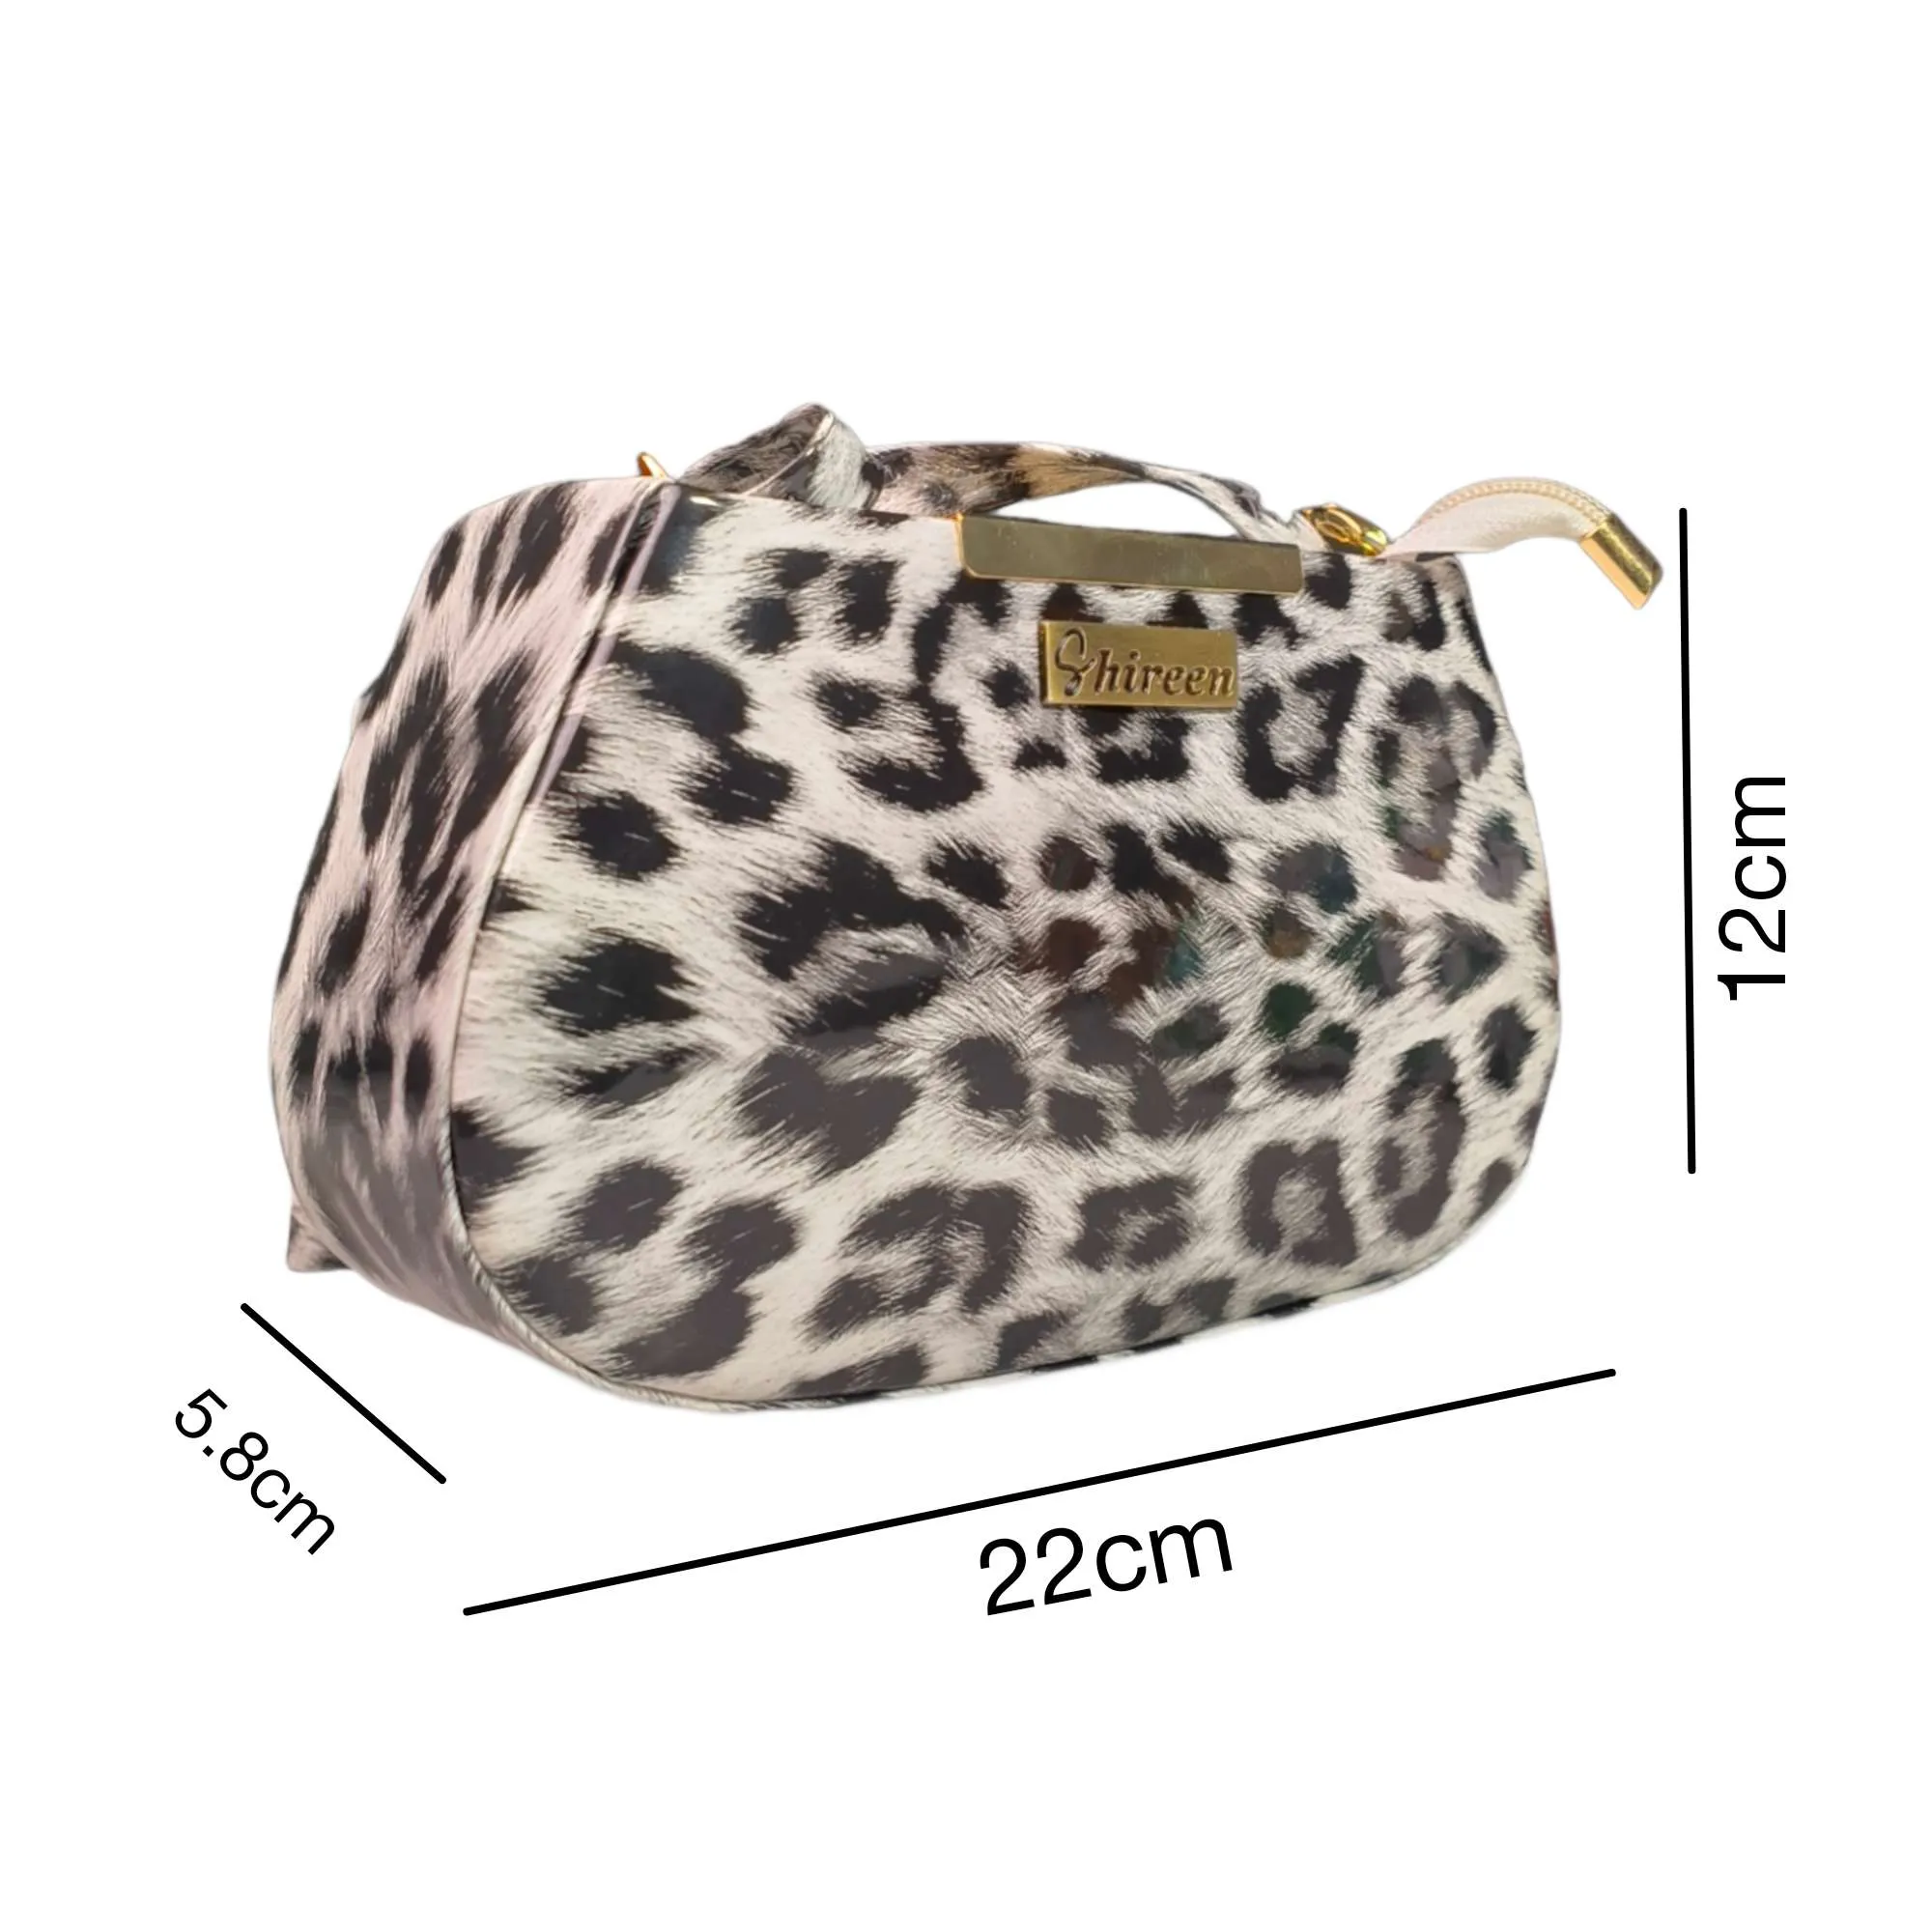 Best Kate Spade - Animal Print Purse for sale in Tallahassee, Florida for  2024